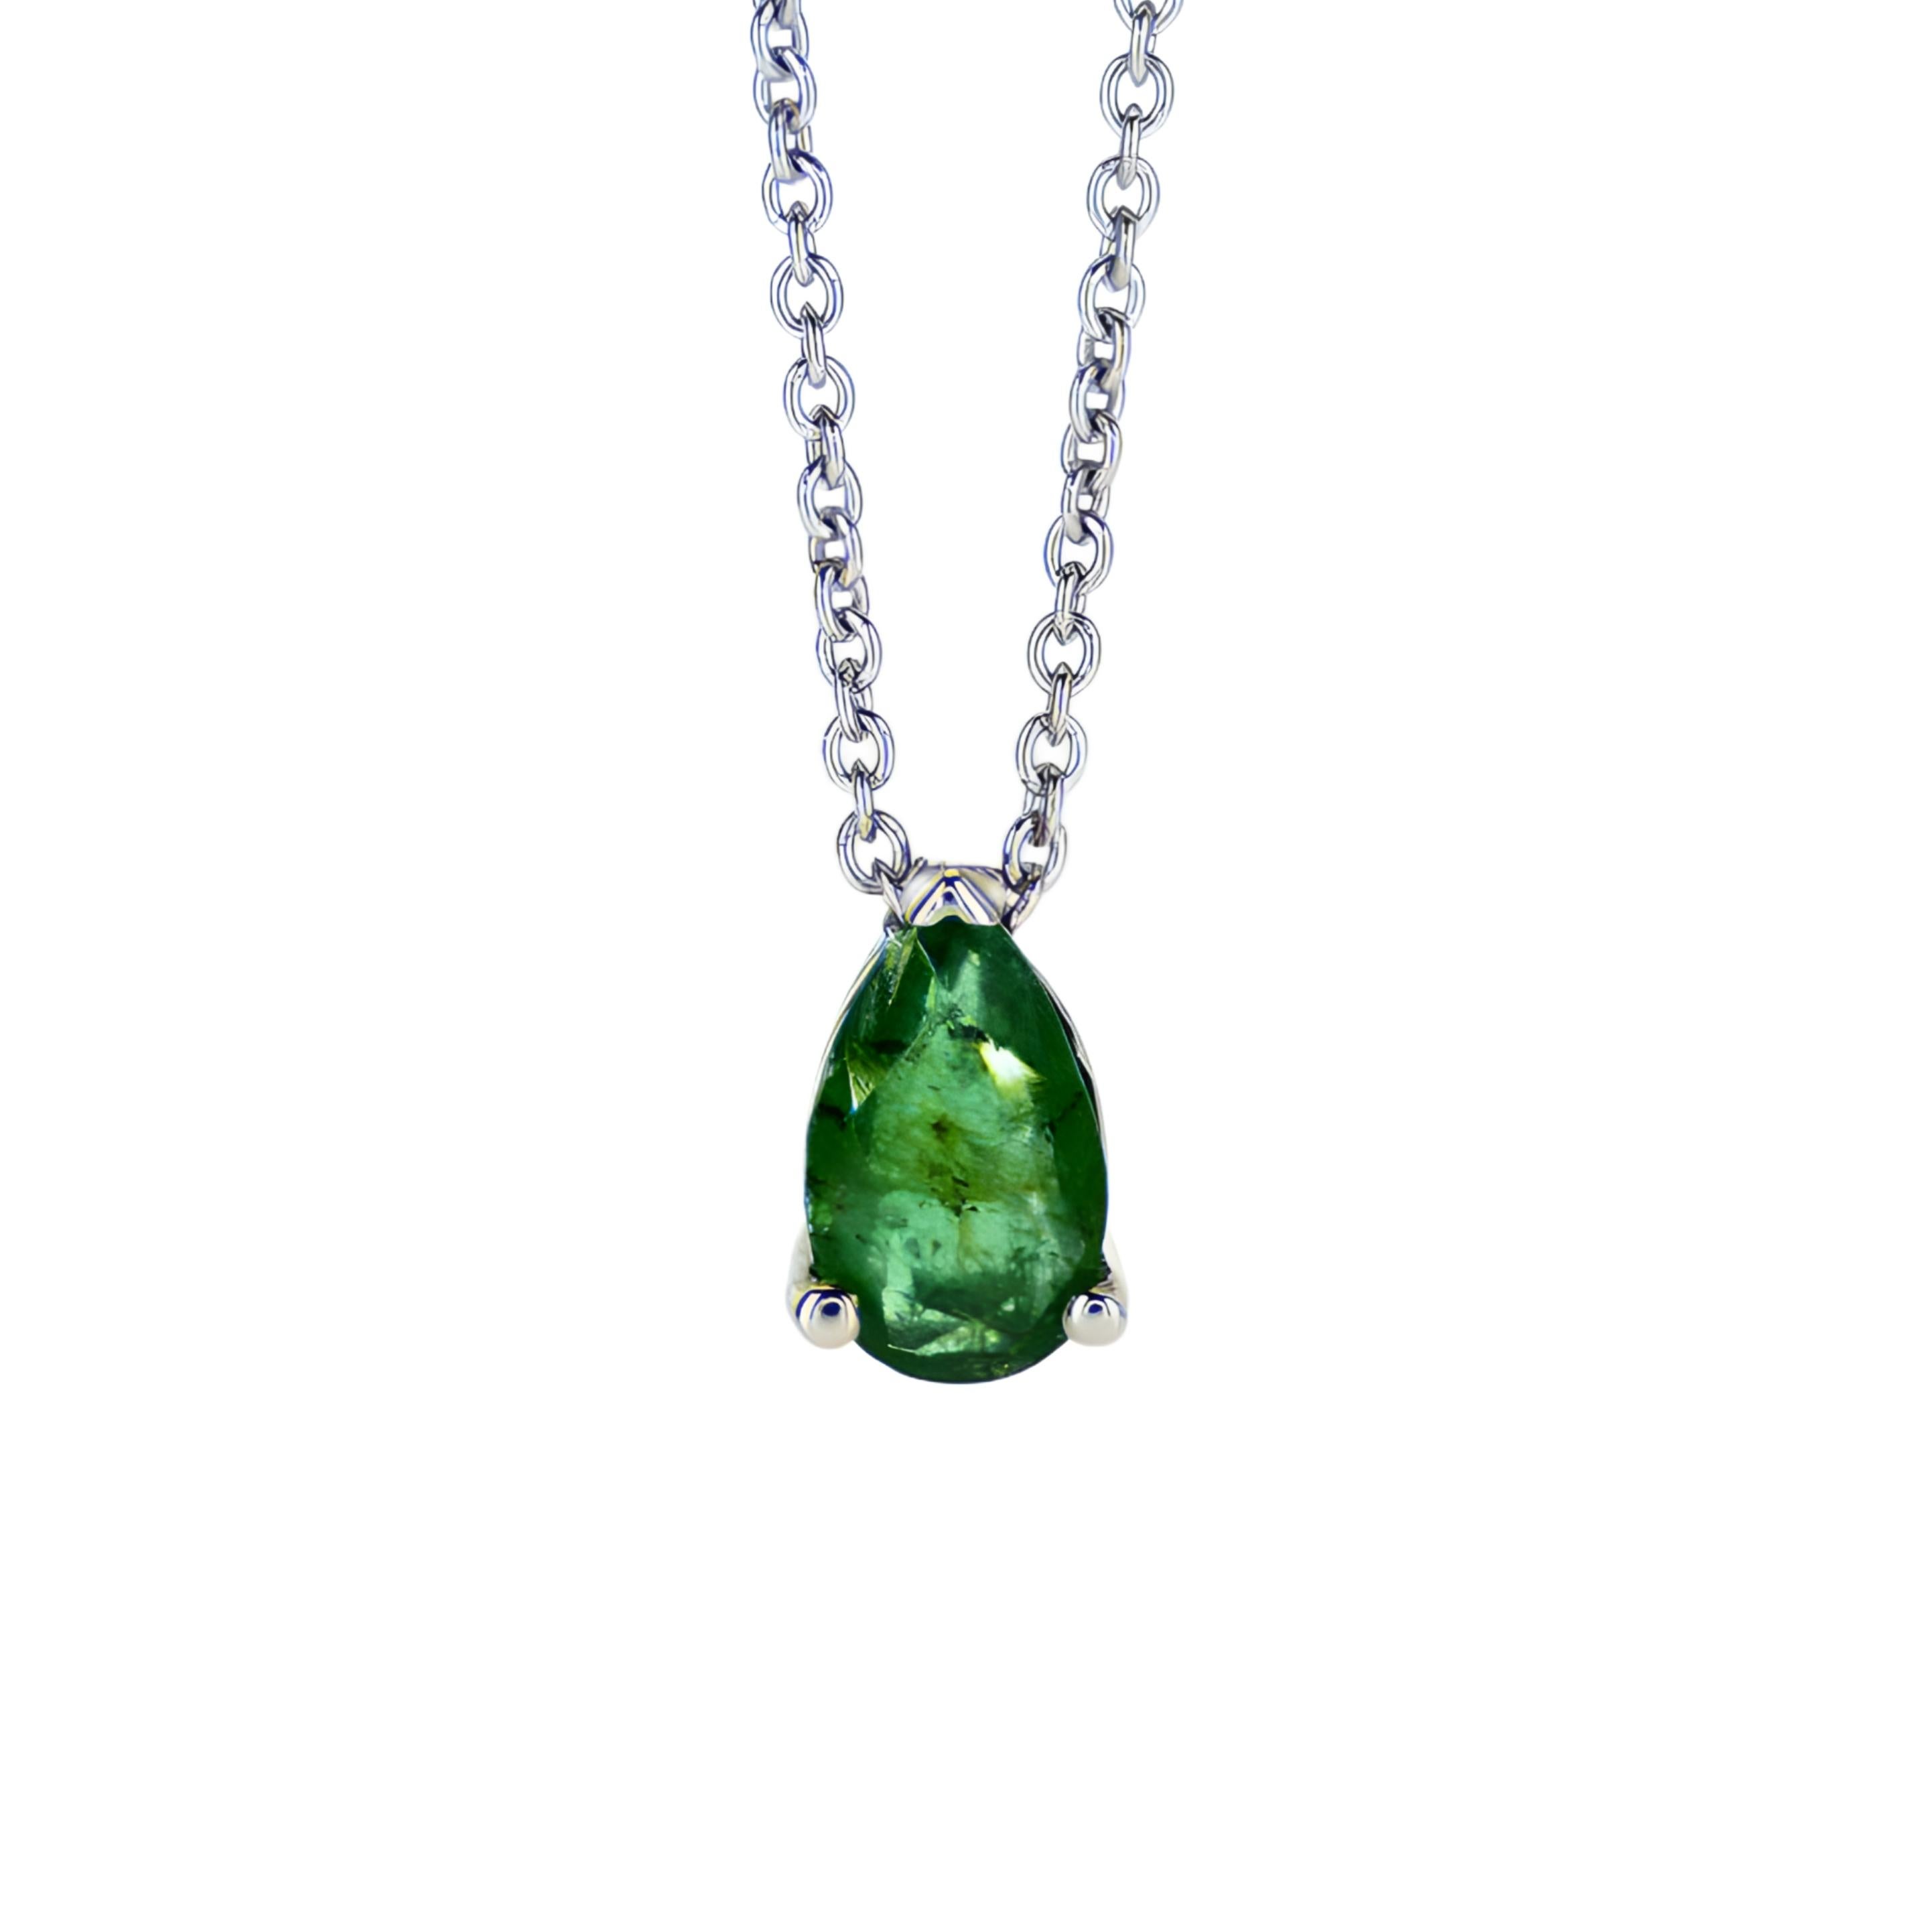 14K White Gold 0.50Ct Pear Shape Emerald Necklace

Product Description:

Introducing our Pear Shape Emerald White Gold Necklace, an exquisite piece that showcases the timeless beauty of a 0.50Ct pear shape emerald, elegantly set in 14K white gold. A